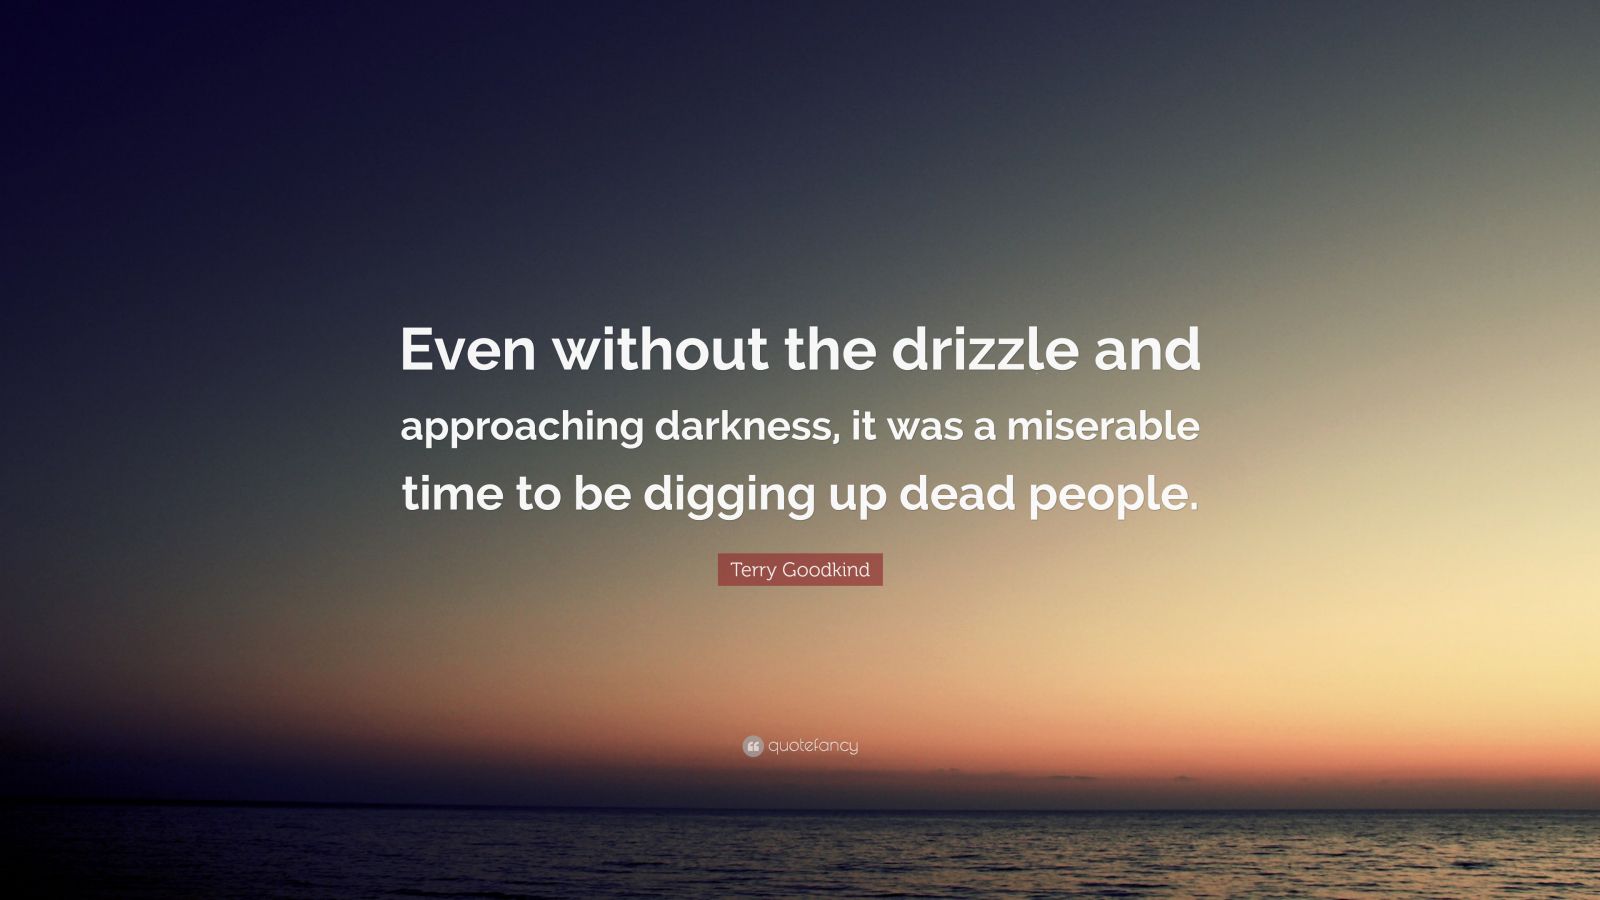 Terry Goodkind Quote “even Without The Drizzle And Approaching Darkness It Was A Miserable